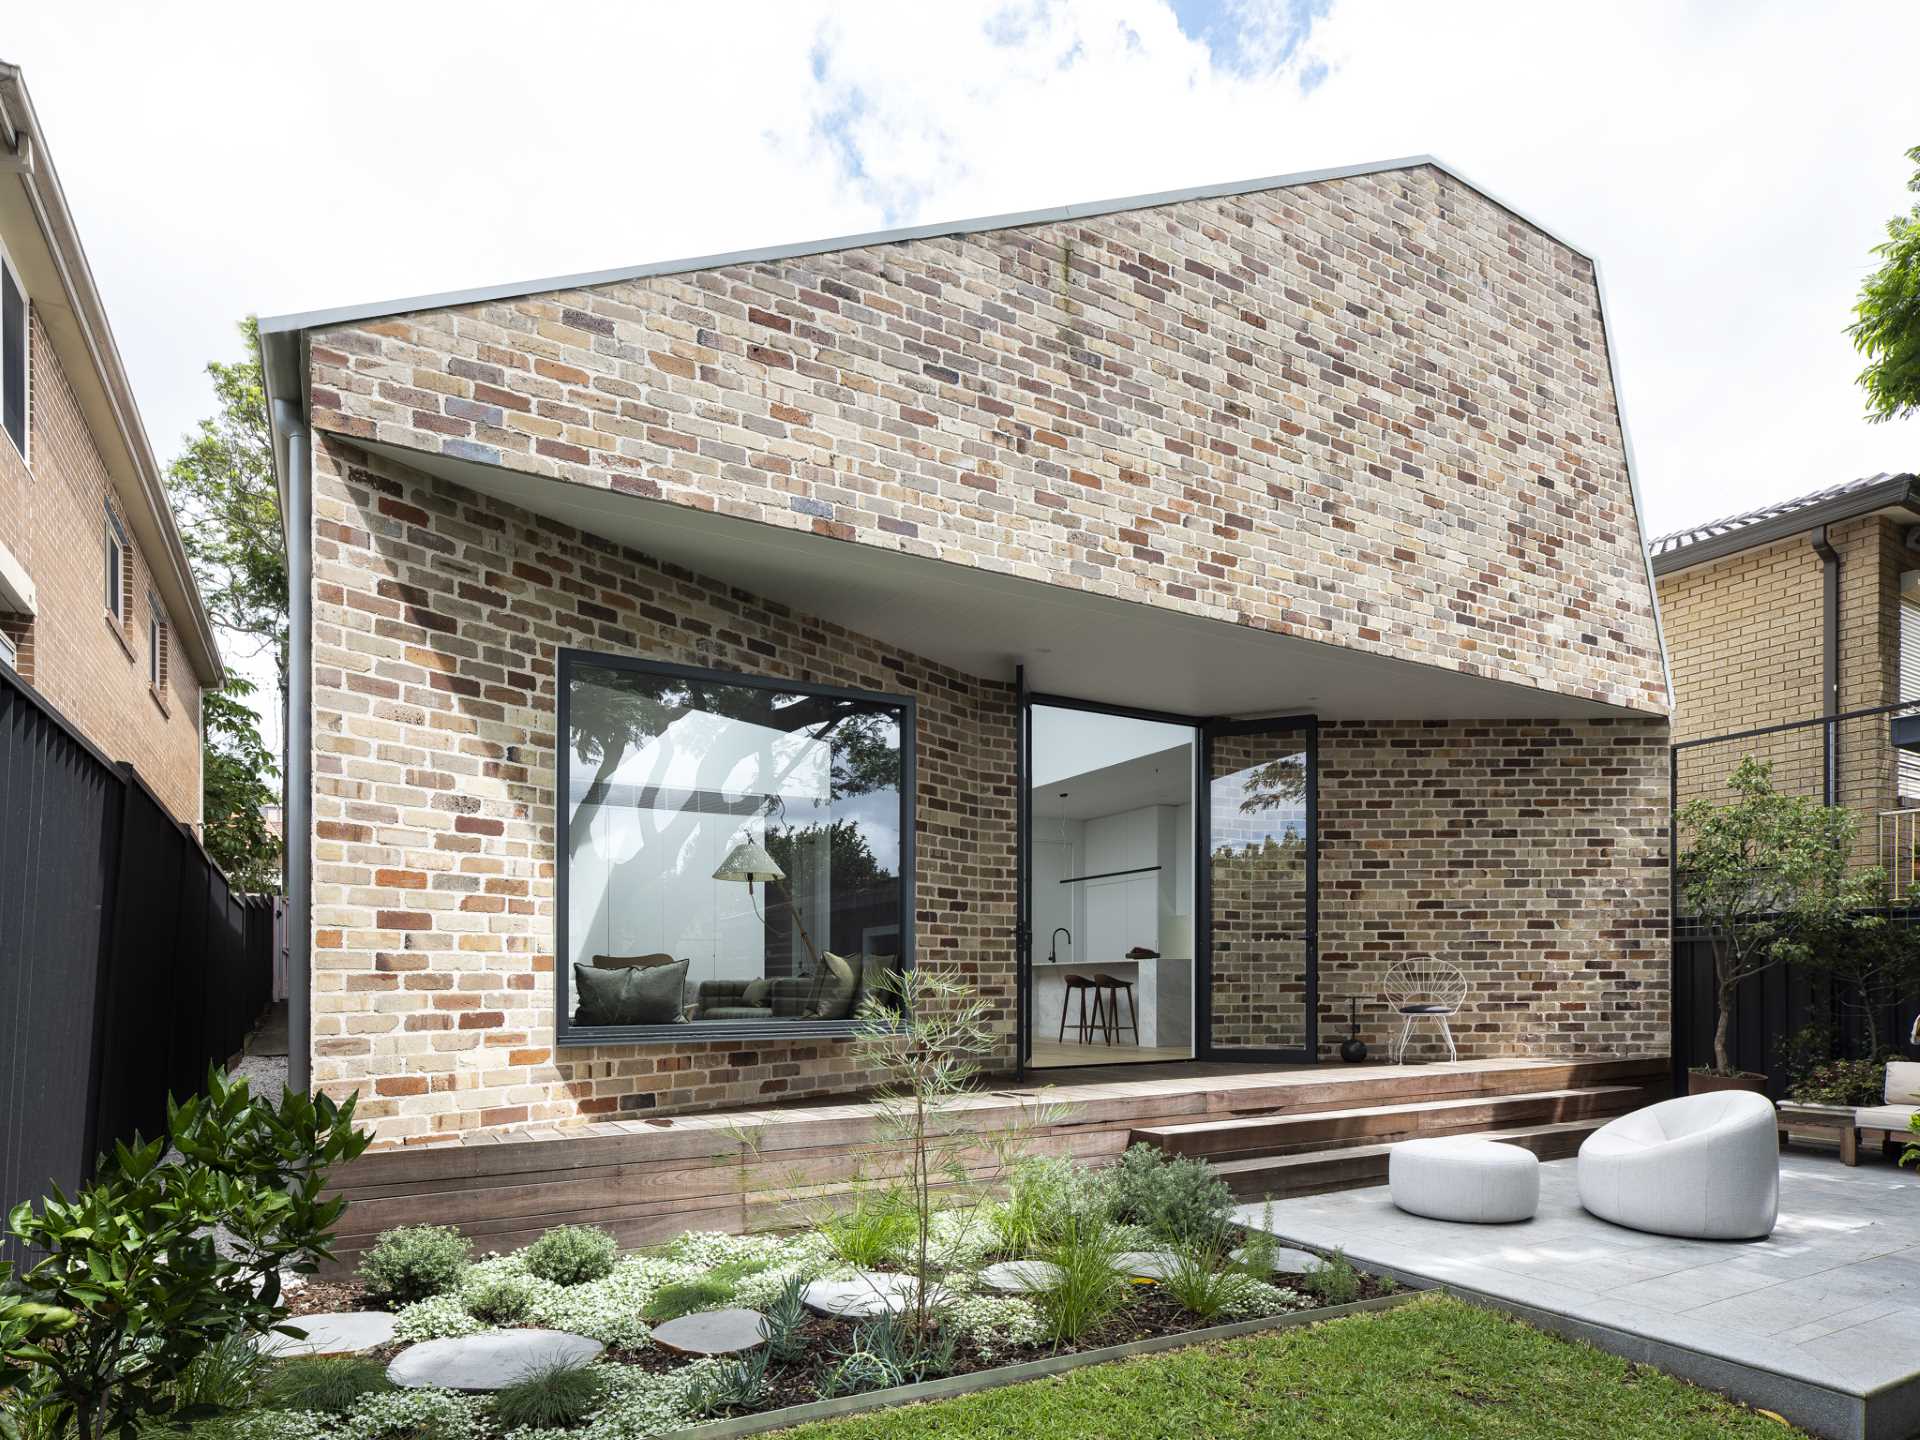 Carla Middleton Architecture has recently completed the renovation of a home in Sydney, Australia, and included in the updated design, is a rear addition built with recycled bricks.